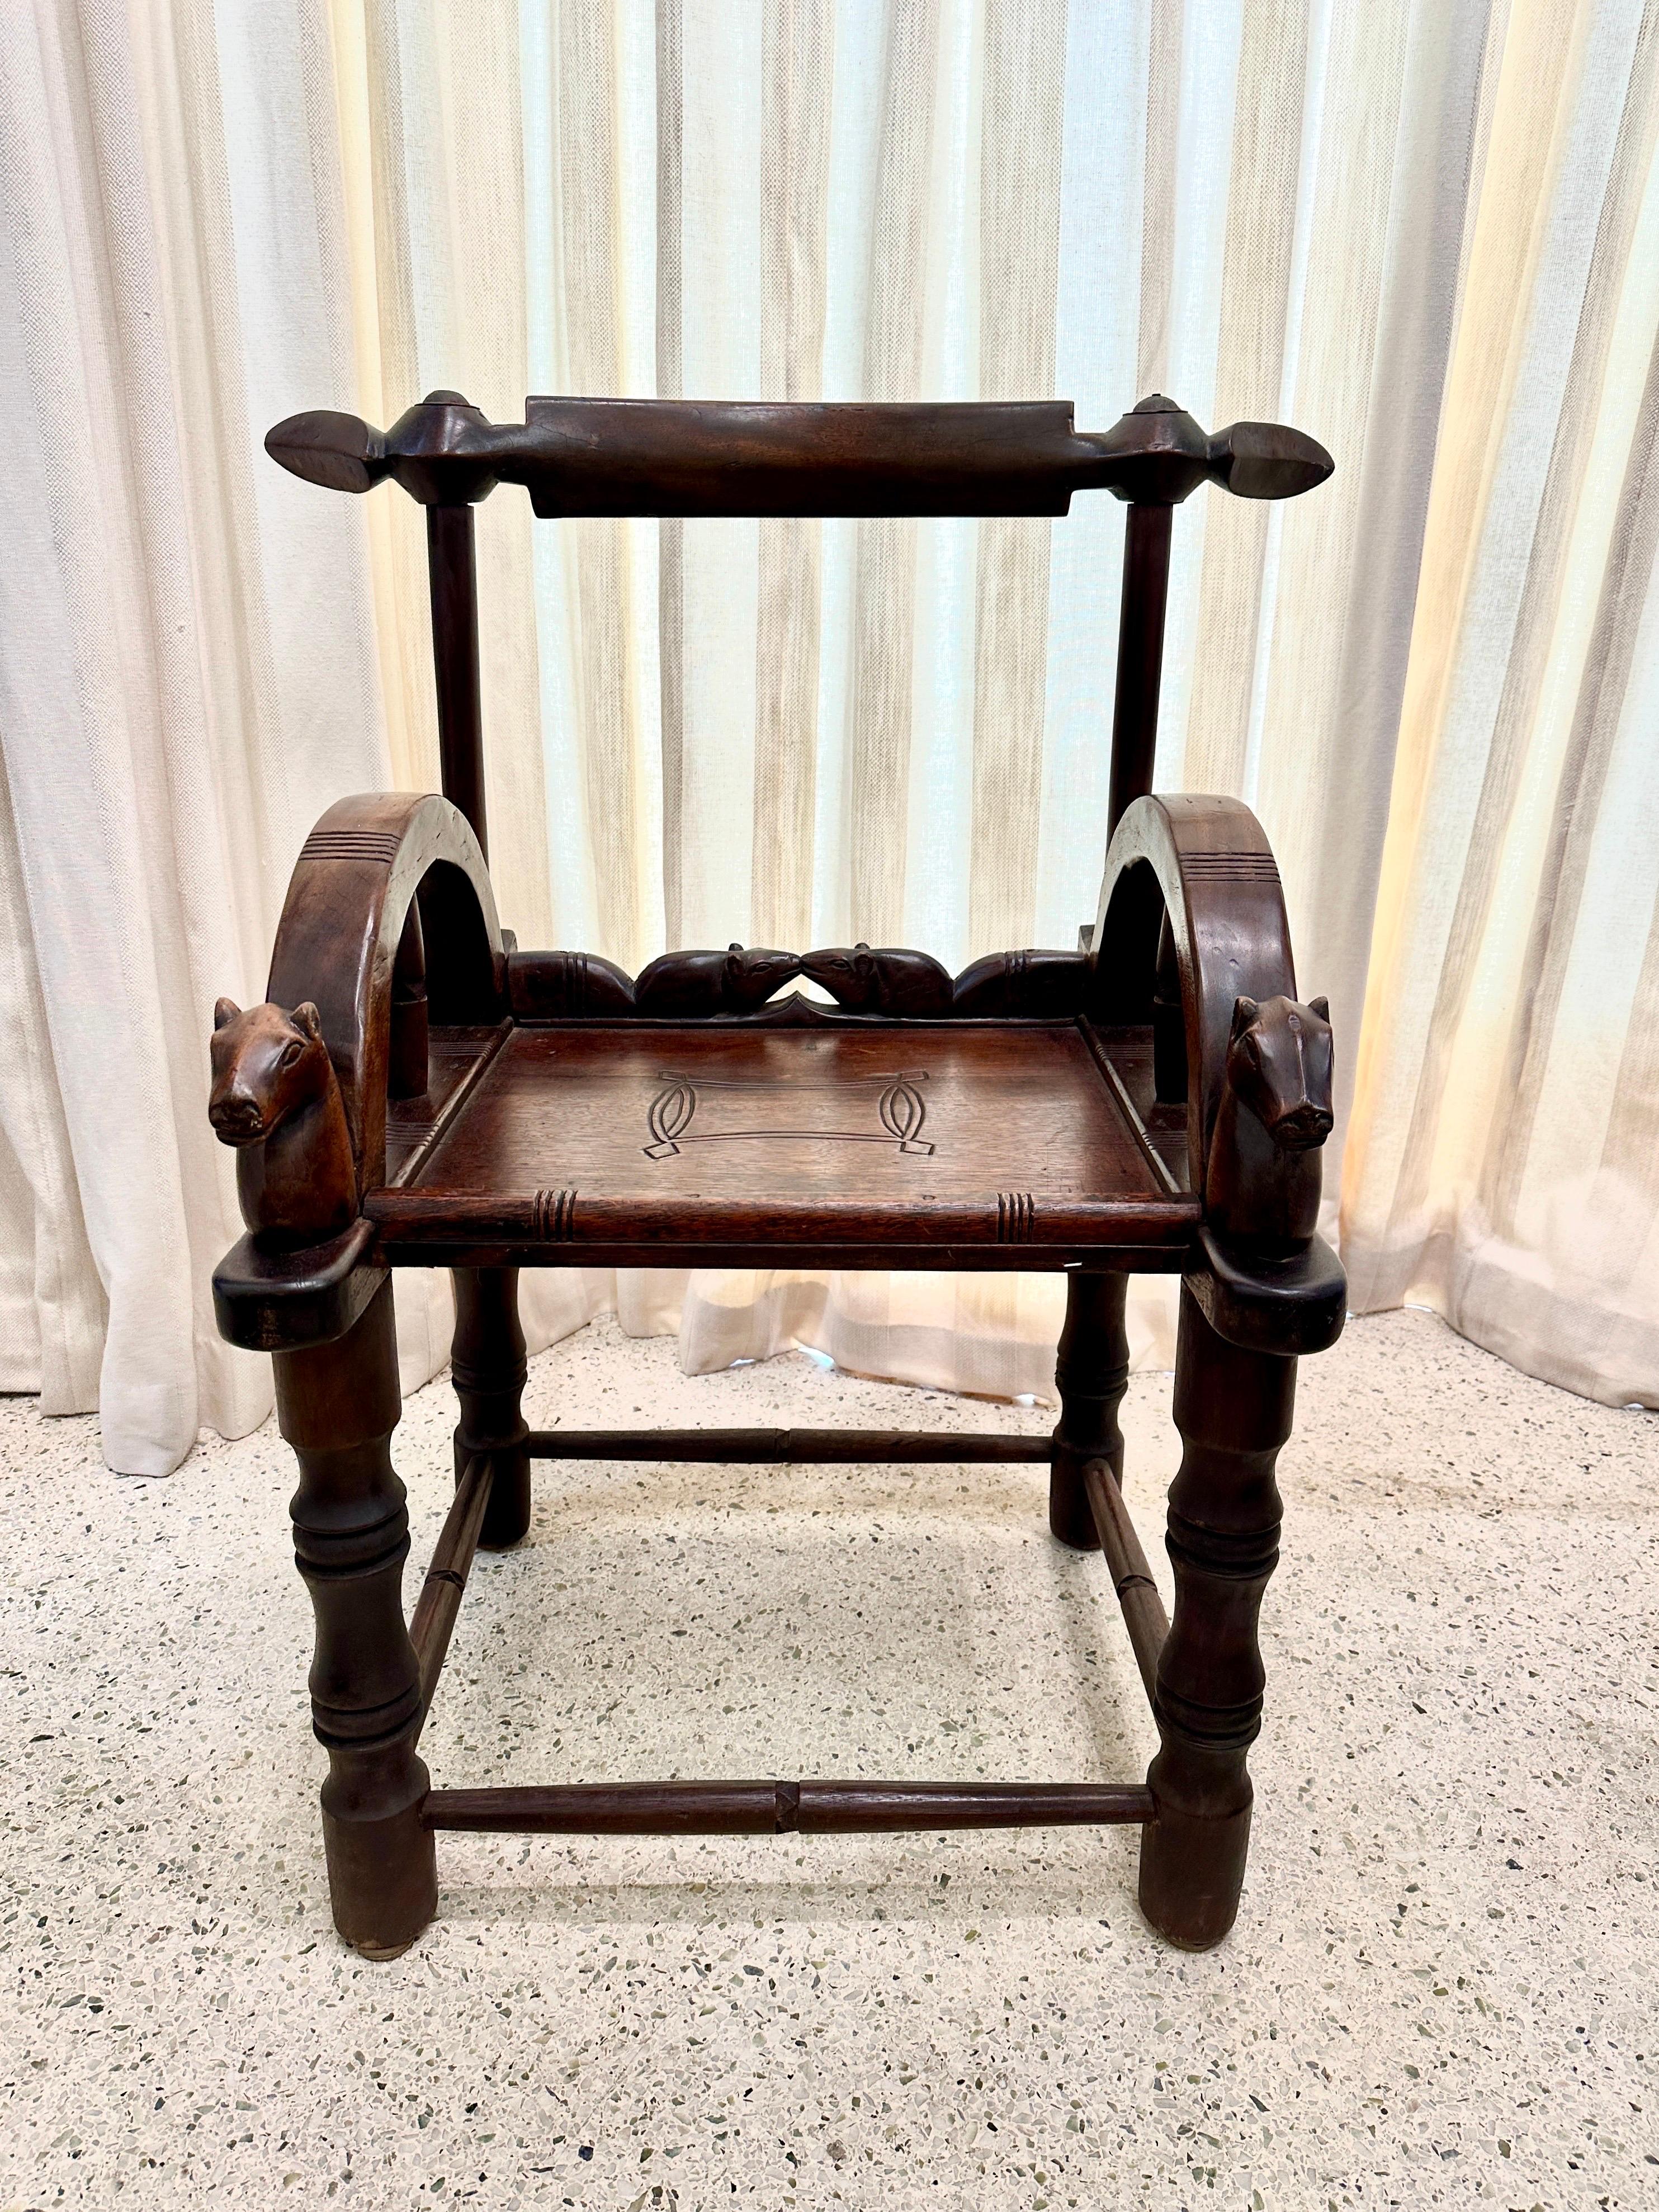 Vintage Chief's Baule Chair from Cote d'Ivoire In Good Condition For Sale In East Hampton, NY